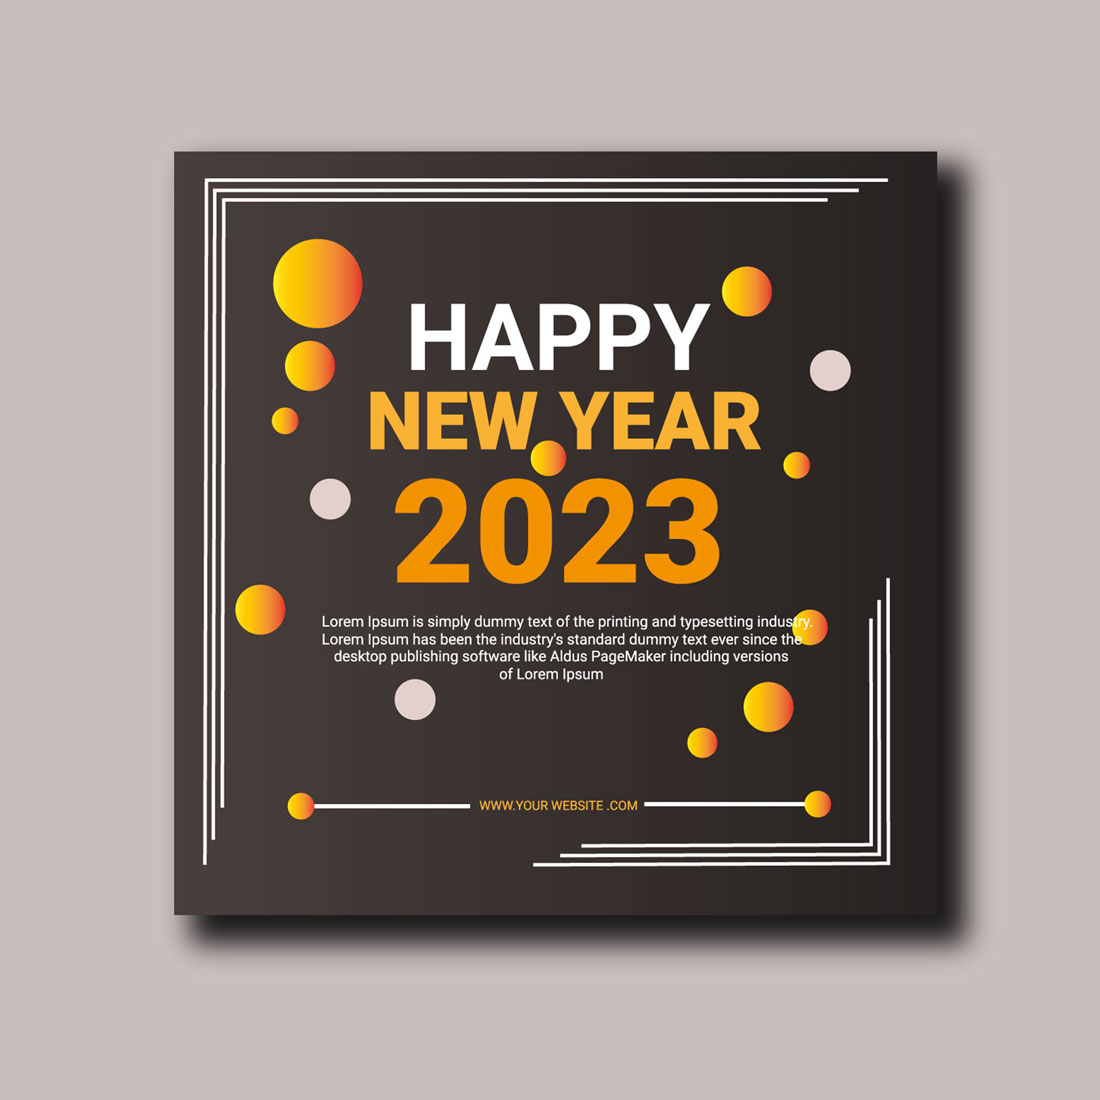 Happy New Year 2023 Social Media Post Template Design main cover.